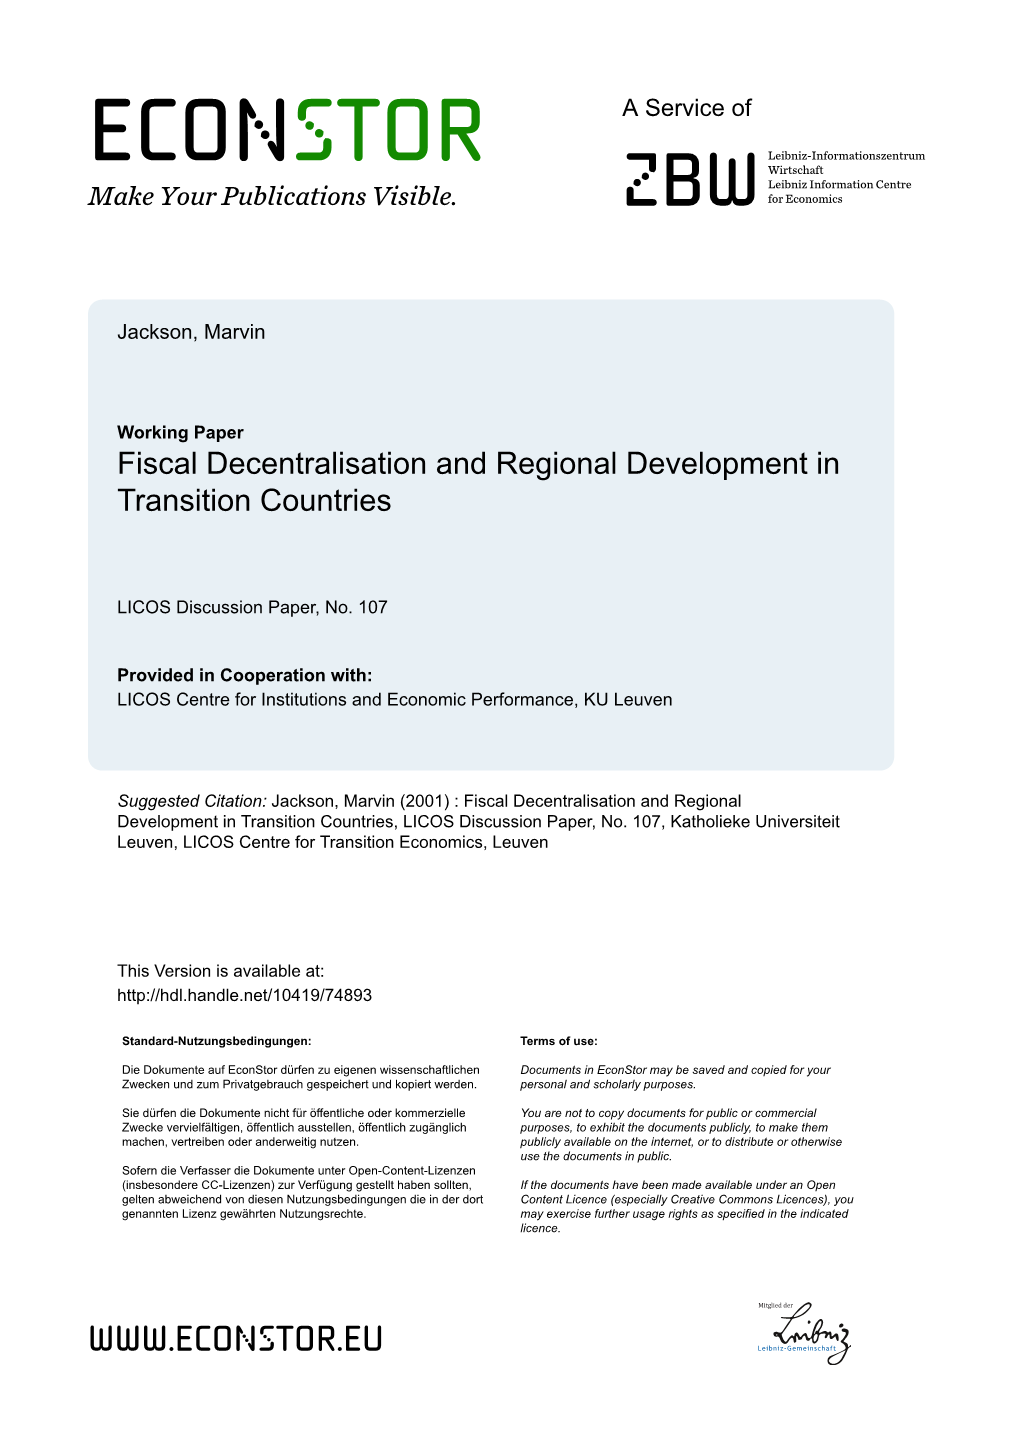 Fiscal Decentralisation and Regional Development in Transition Countries